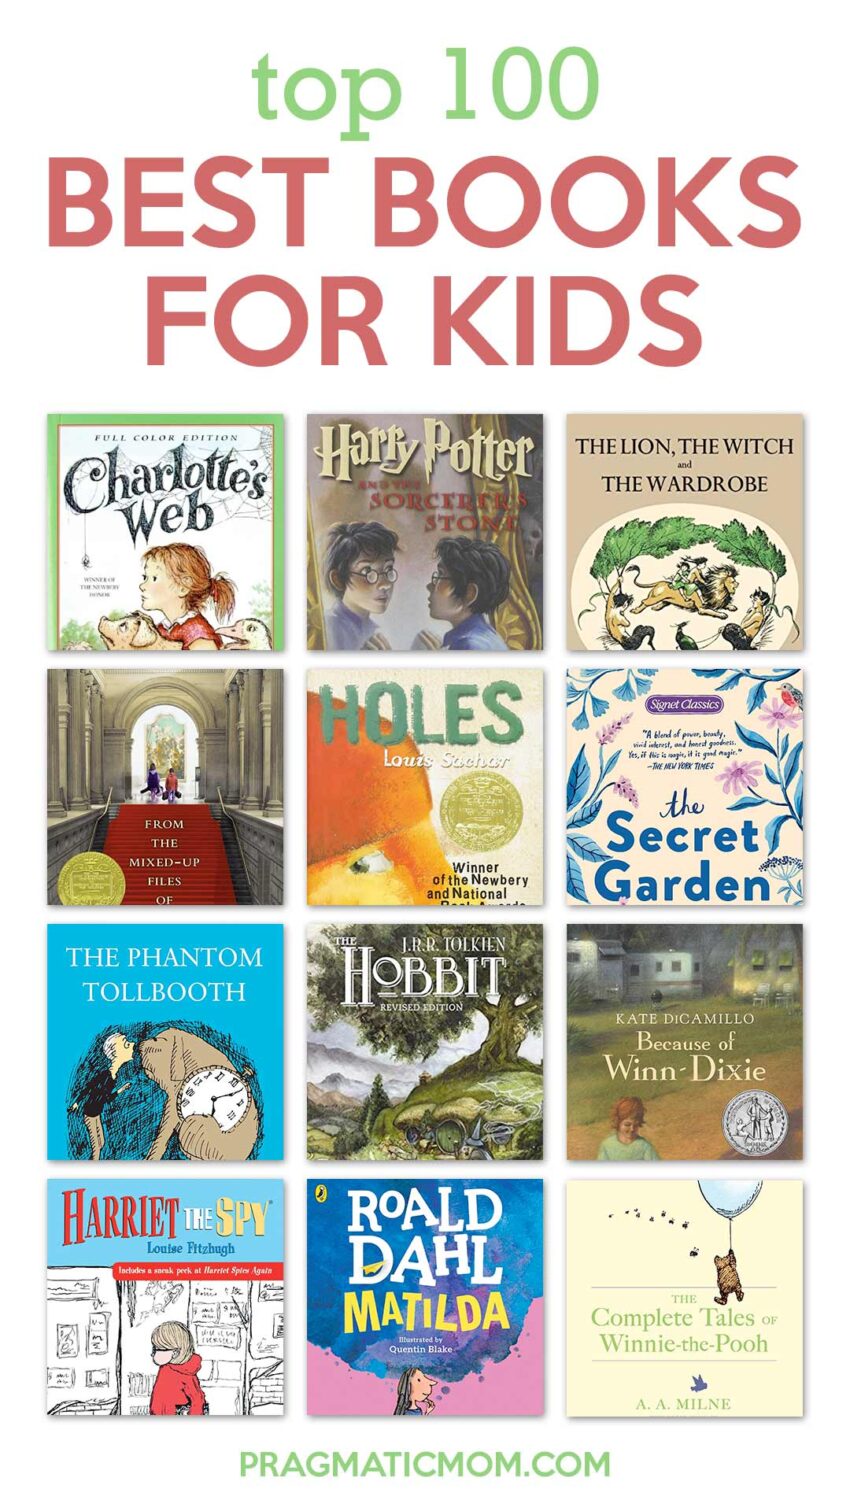 Top 100 Best Books for Kids